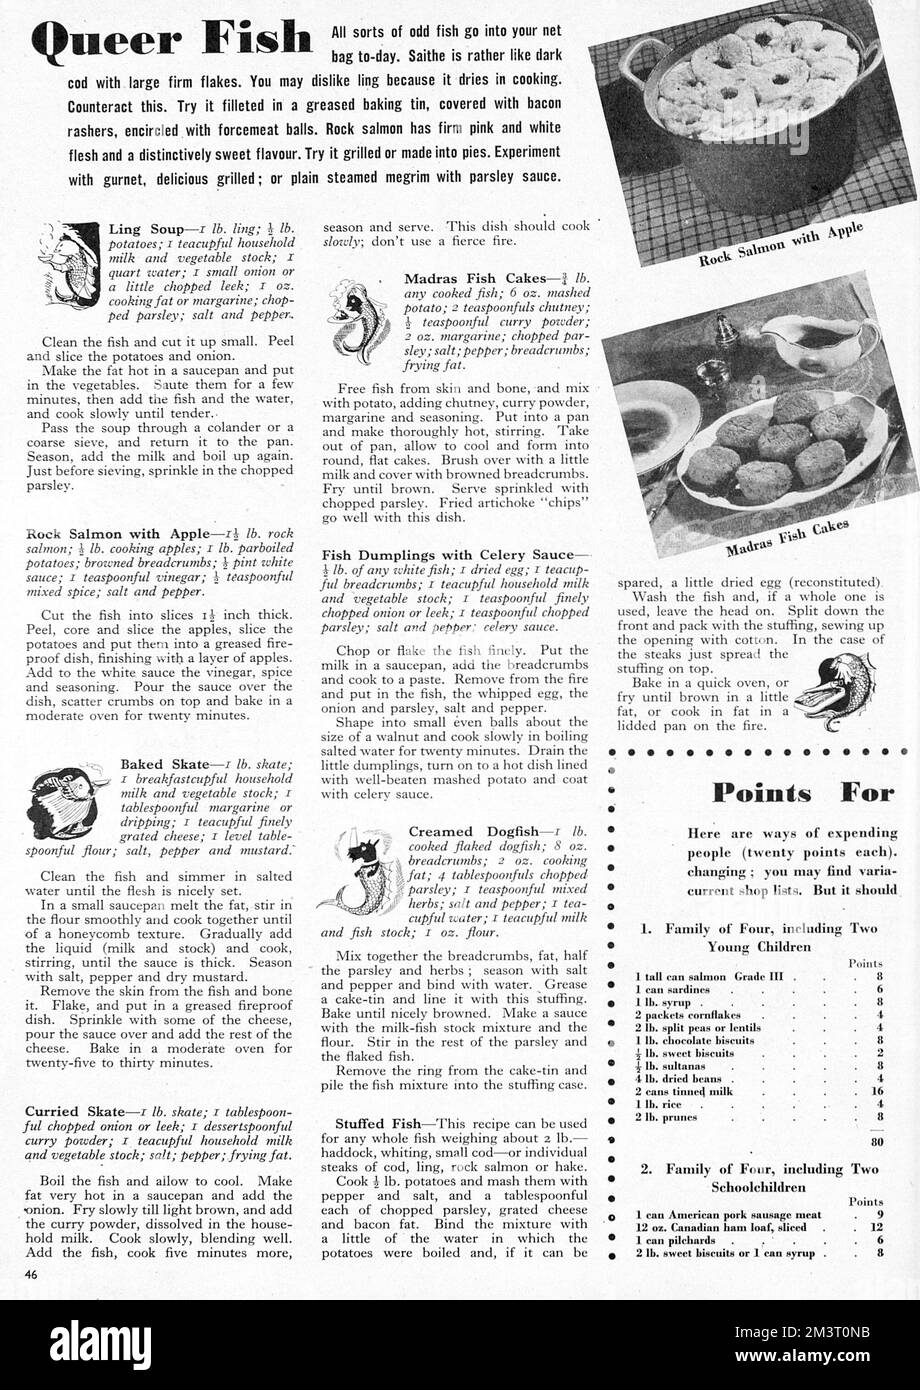 Queer fish, 1943. Wartime recipes using fish such as ling, rock salmon, skate and dogfish.  1943 Stock Photo